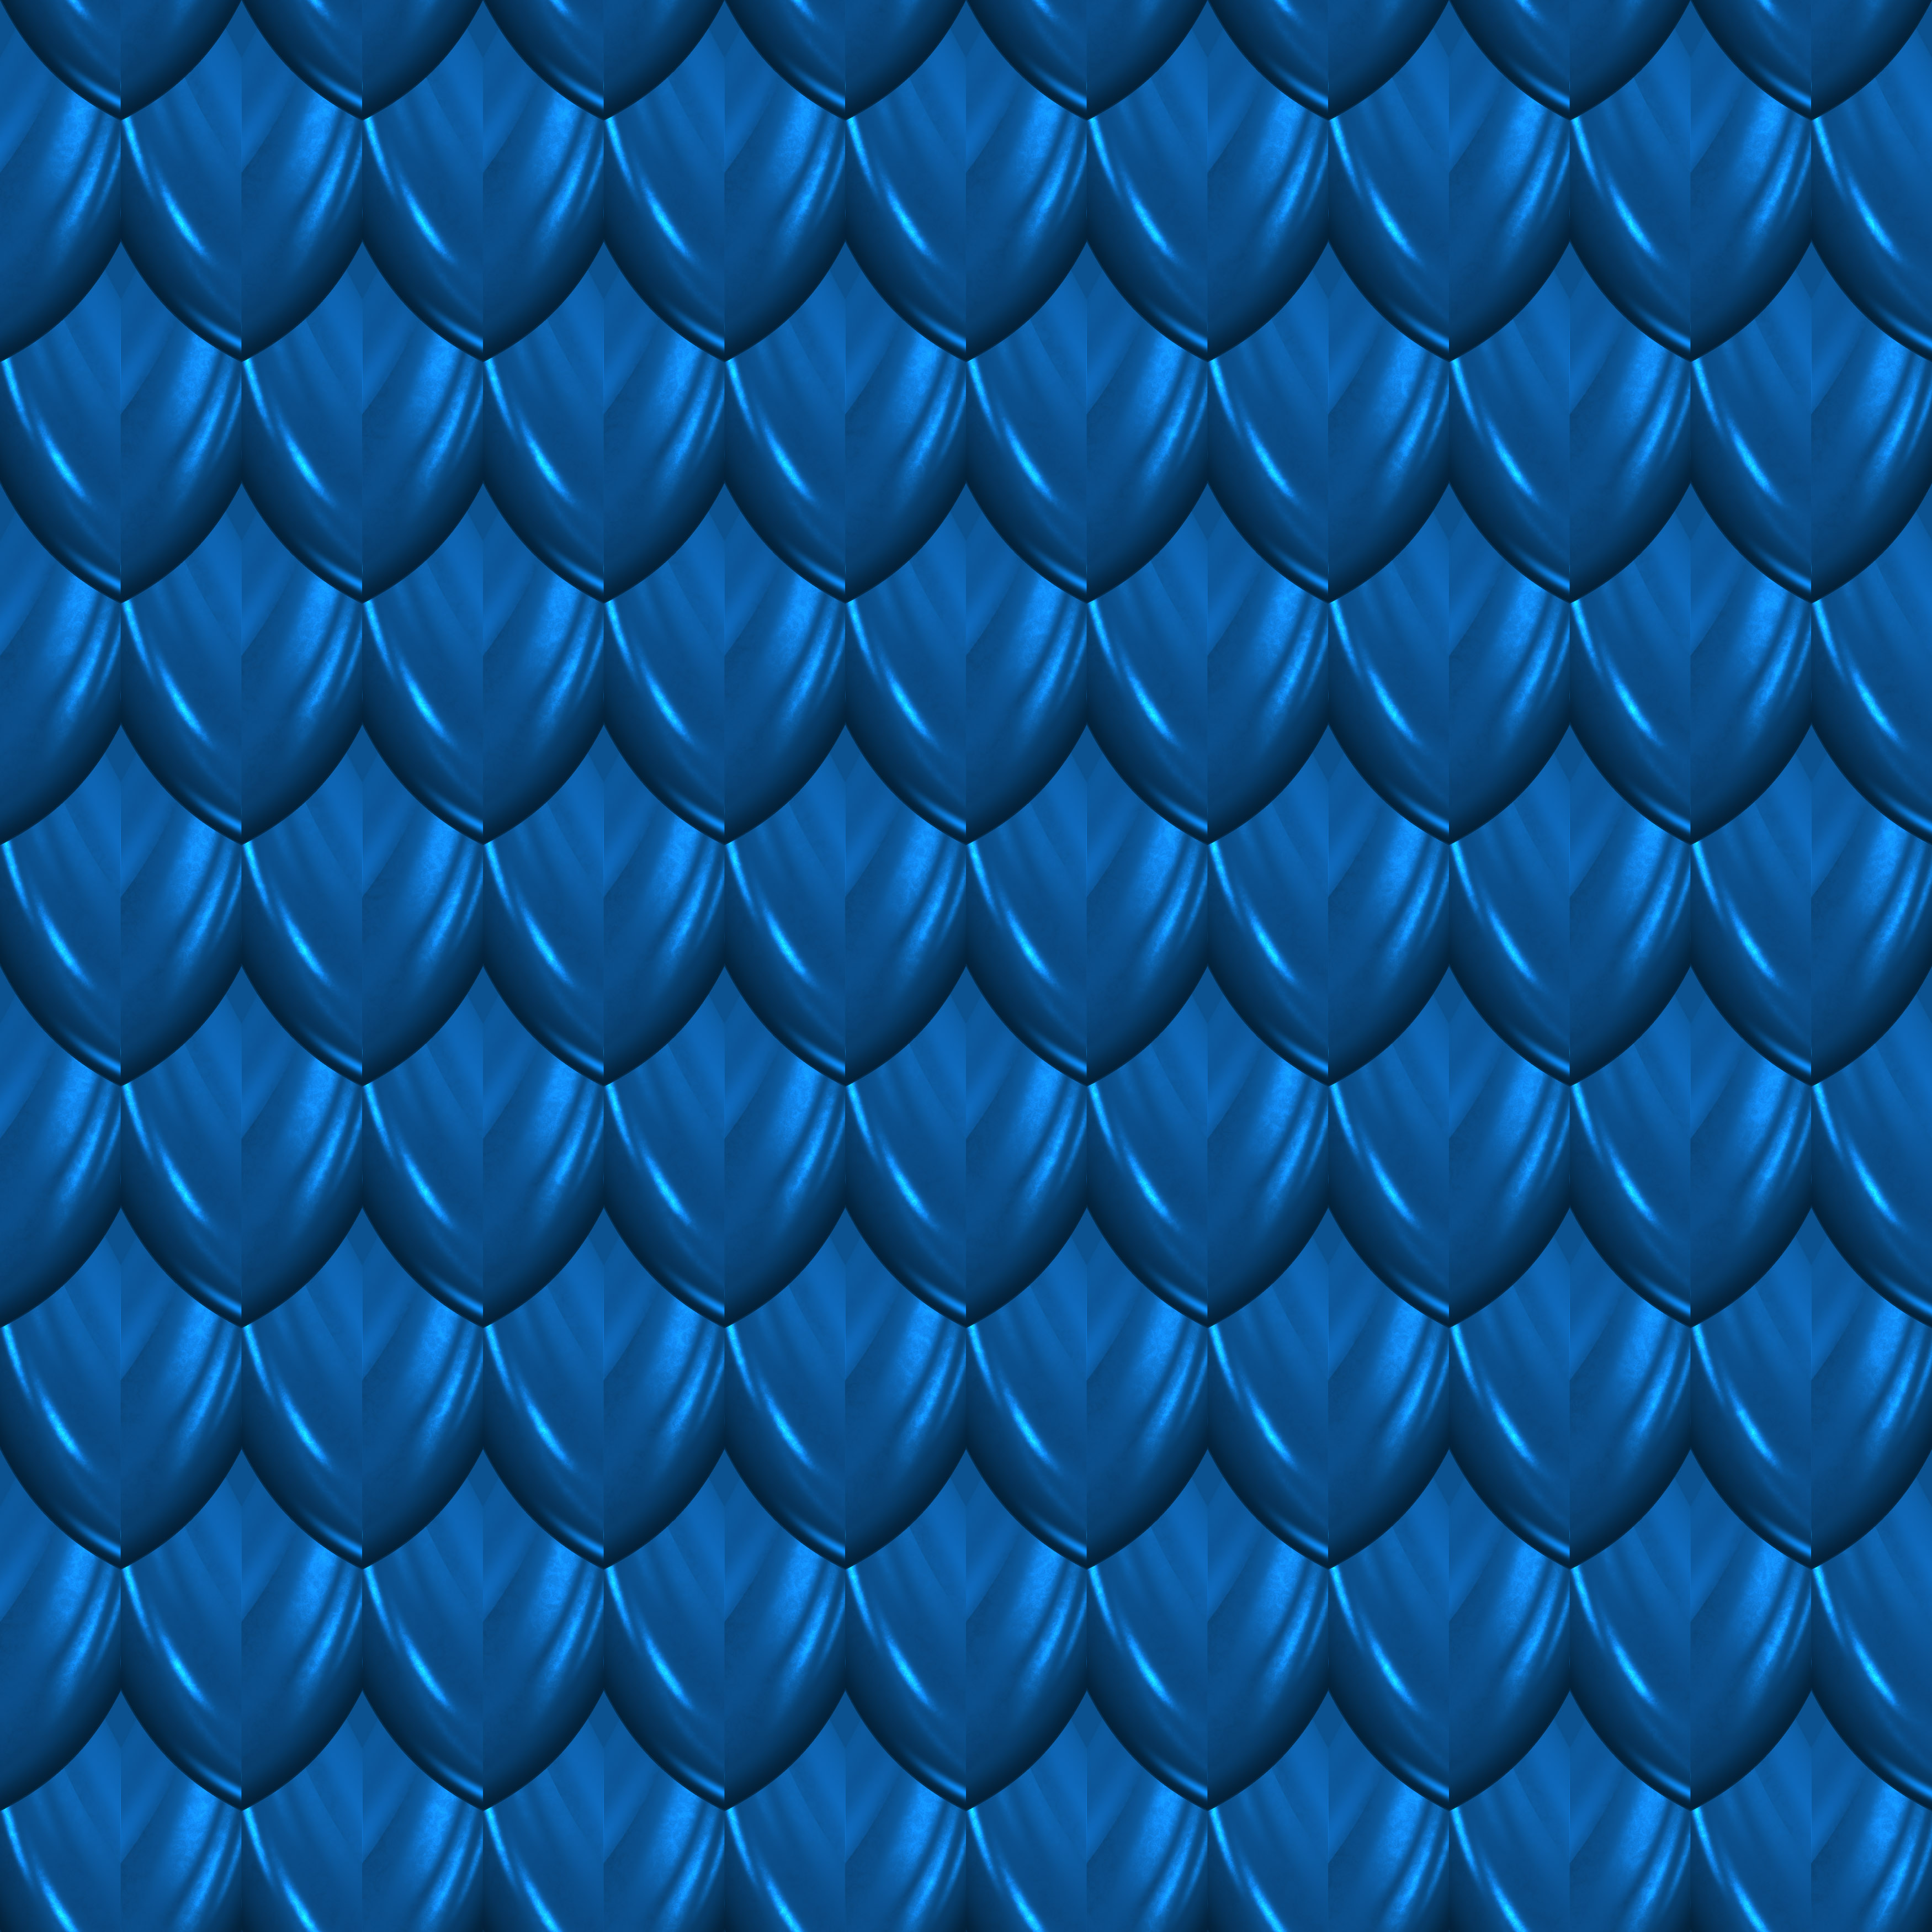 Free download Dragon Scales in Shiny Blue Seamless Texture  wwwmyfreetextures [3500x3500] for your Desktop, Mobile & Tablet | Explore  44+ Scale Background | Mermaid Scale Wallpaper, Large Scale Wallpaper,  Large Scale Floral Wallpaper